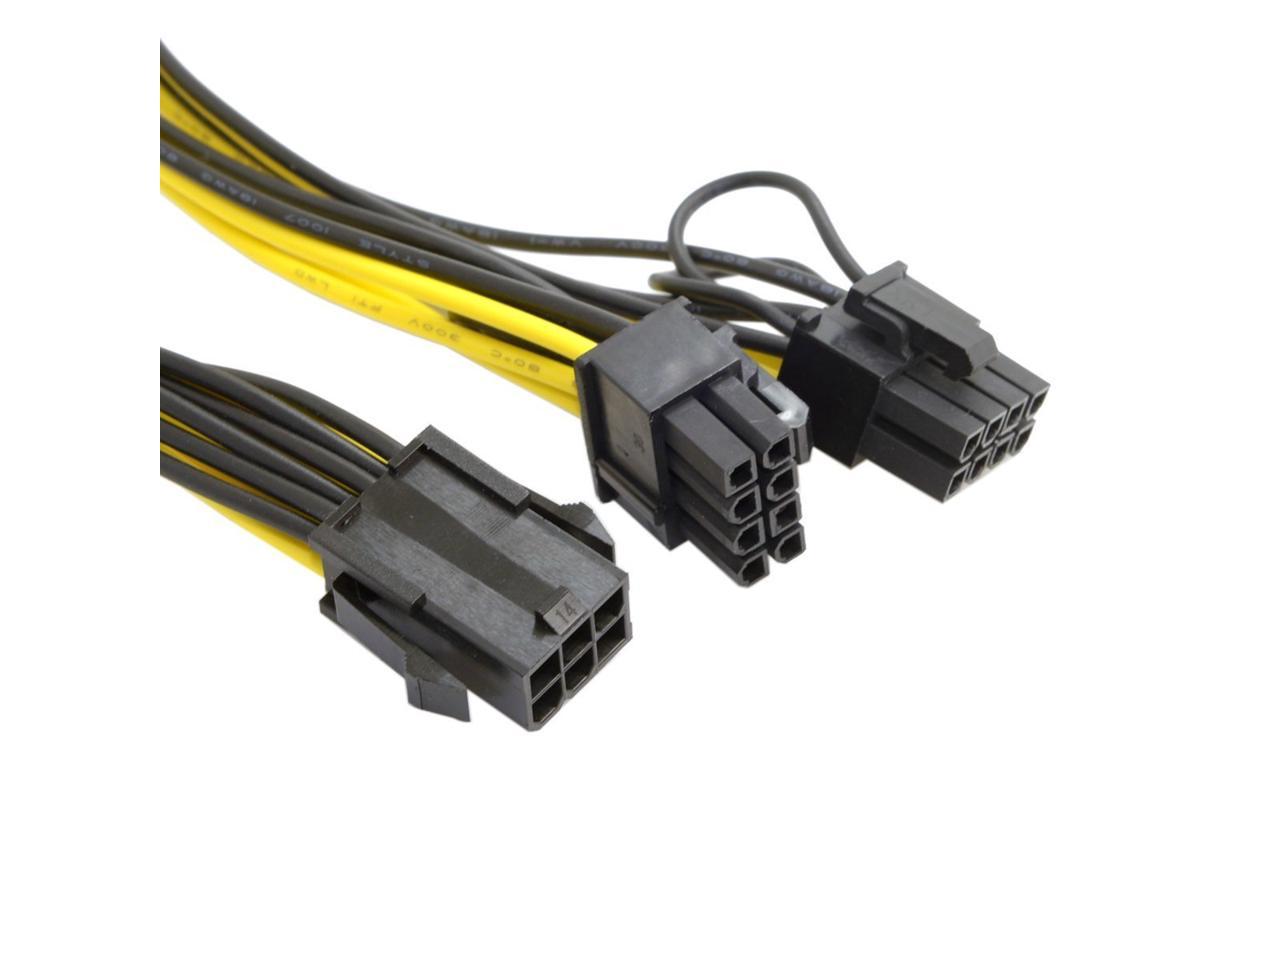 Image Card PCI Express Power GPU VGA Y-Splitter Extension Cable 6+2 Wobekuy PCI-E 6 Pin to Dual PCIe 8 Pin